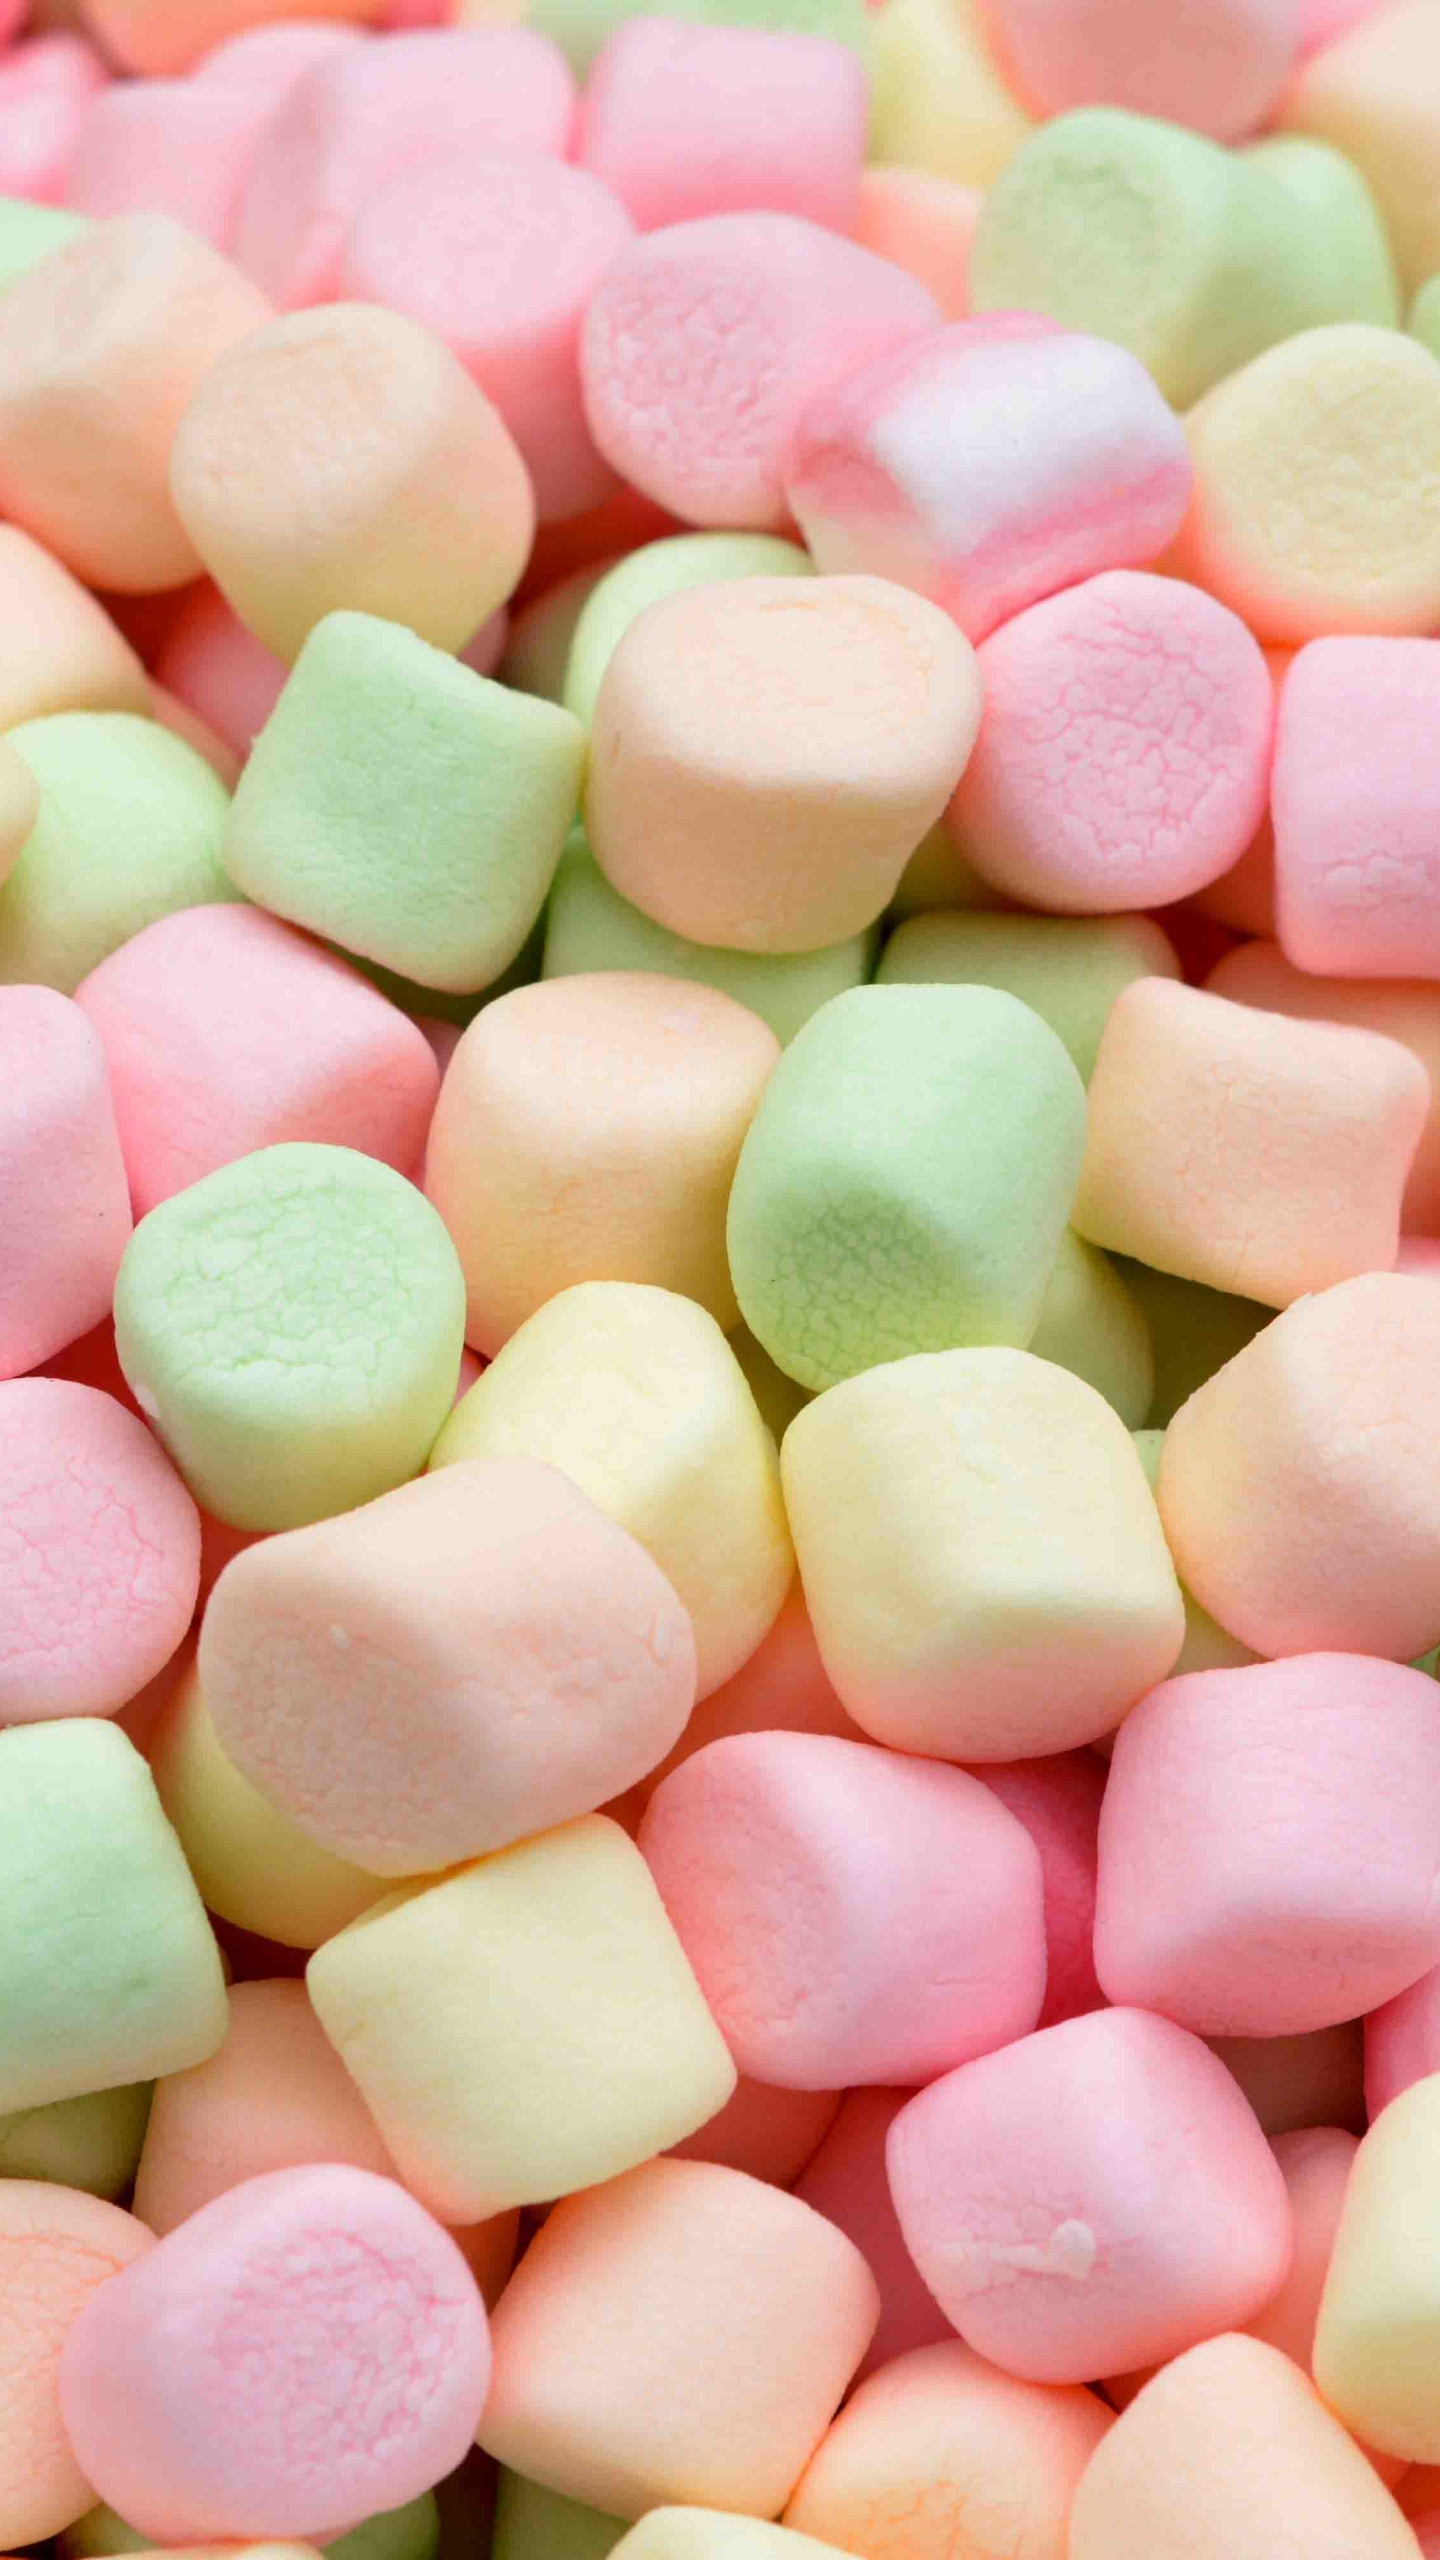 Marshmallow: Made from corn syrup, dextrose, gelatin, and egg albumen. 1440x2560 HD Background.